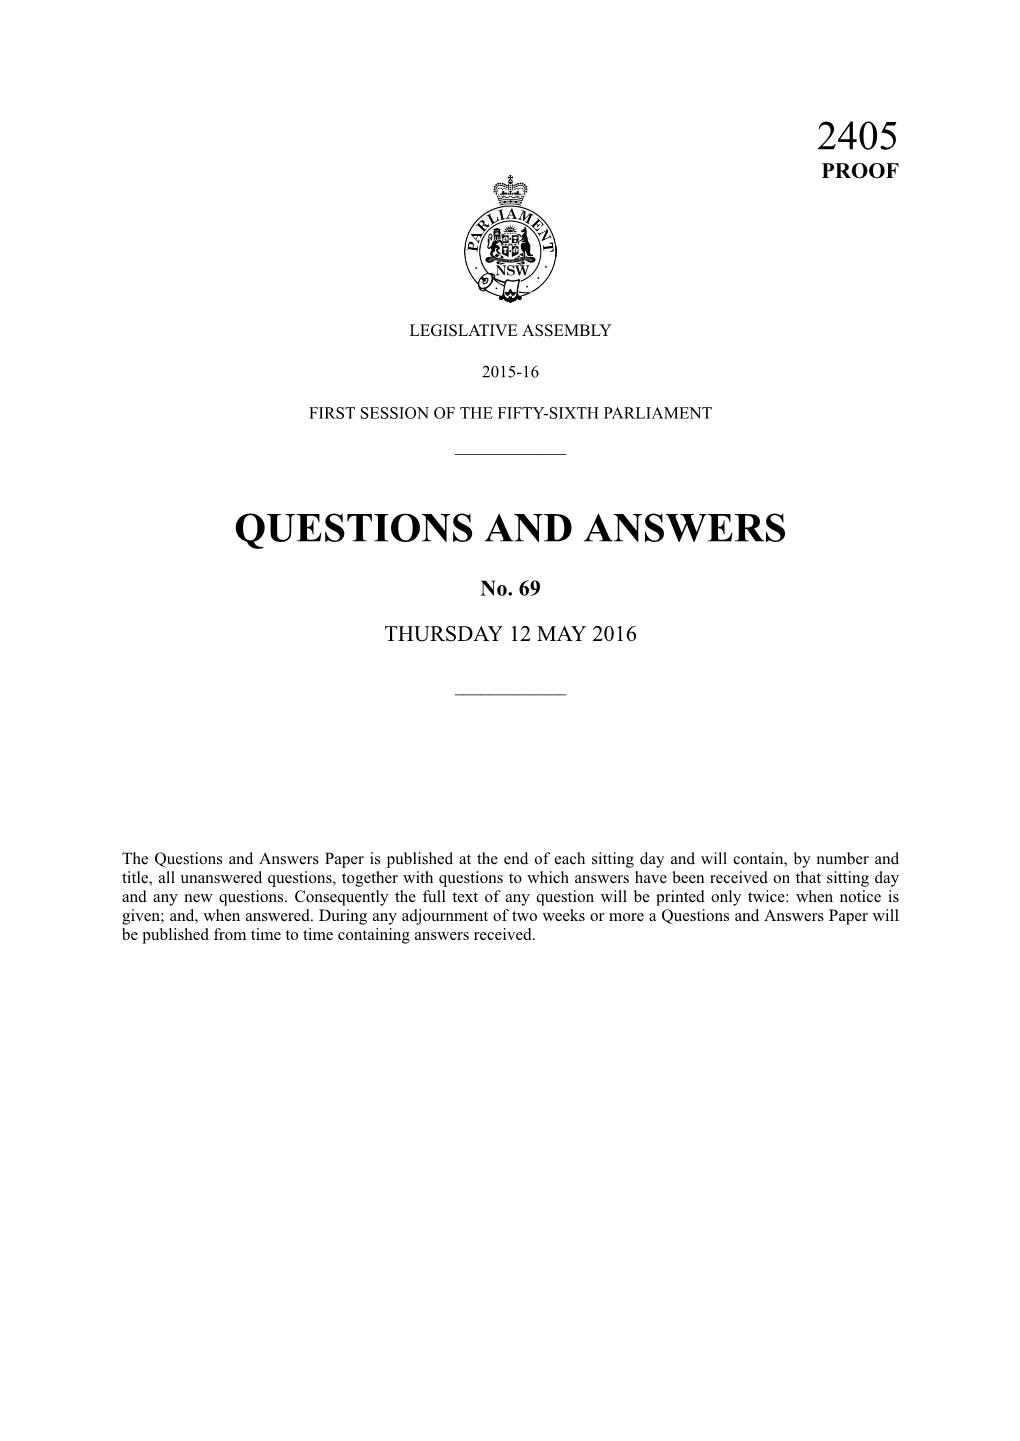 Questions & Answers Paper No. 69